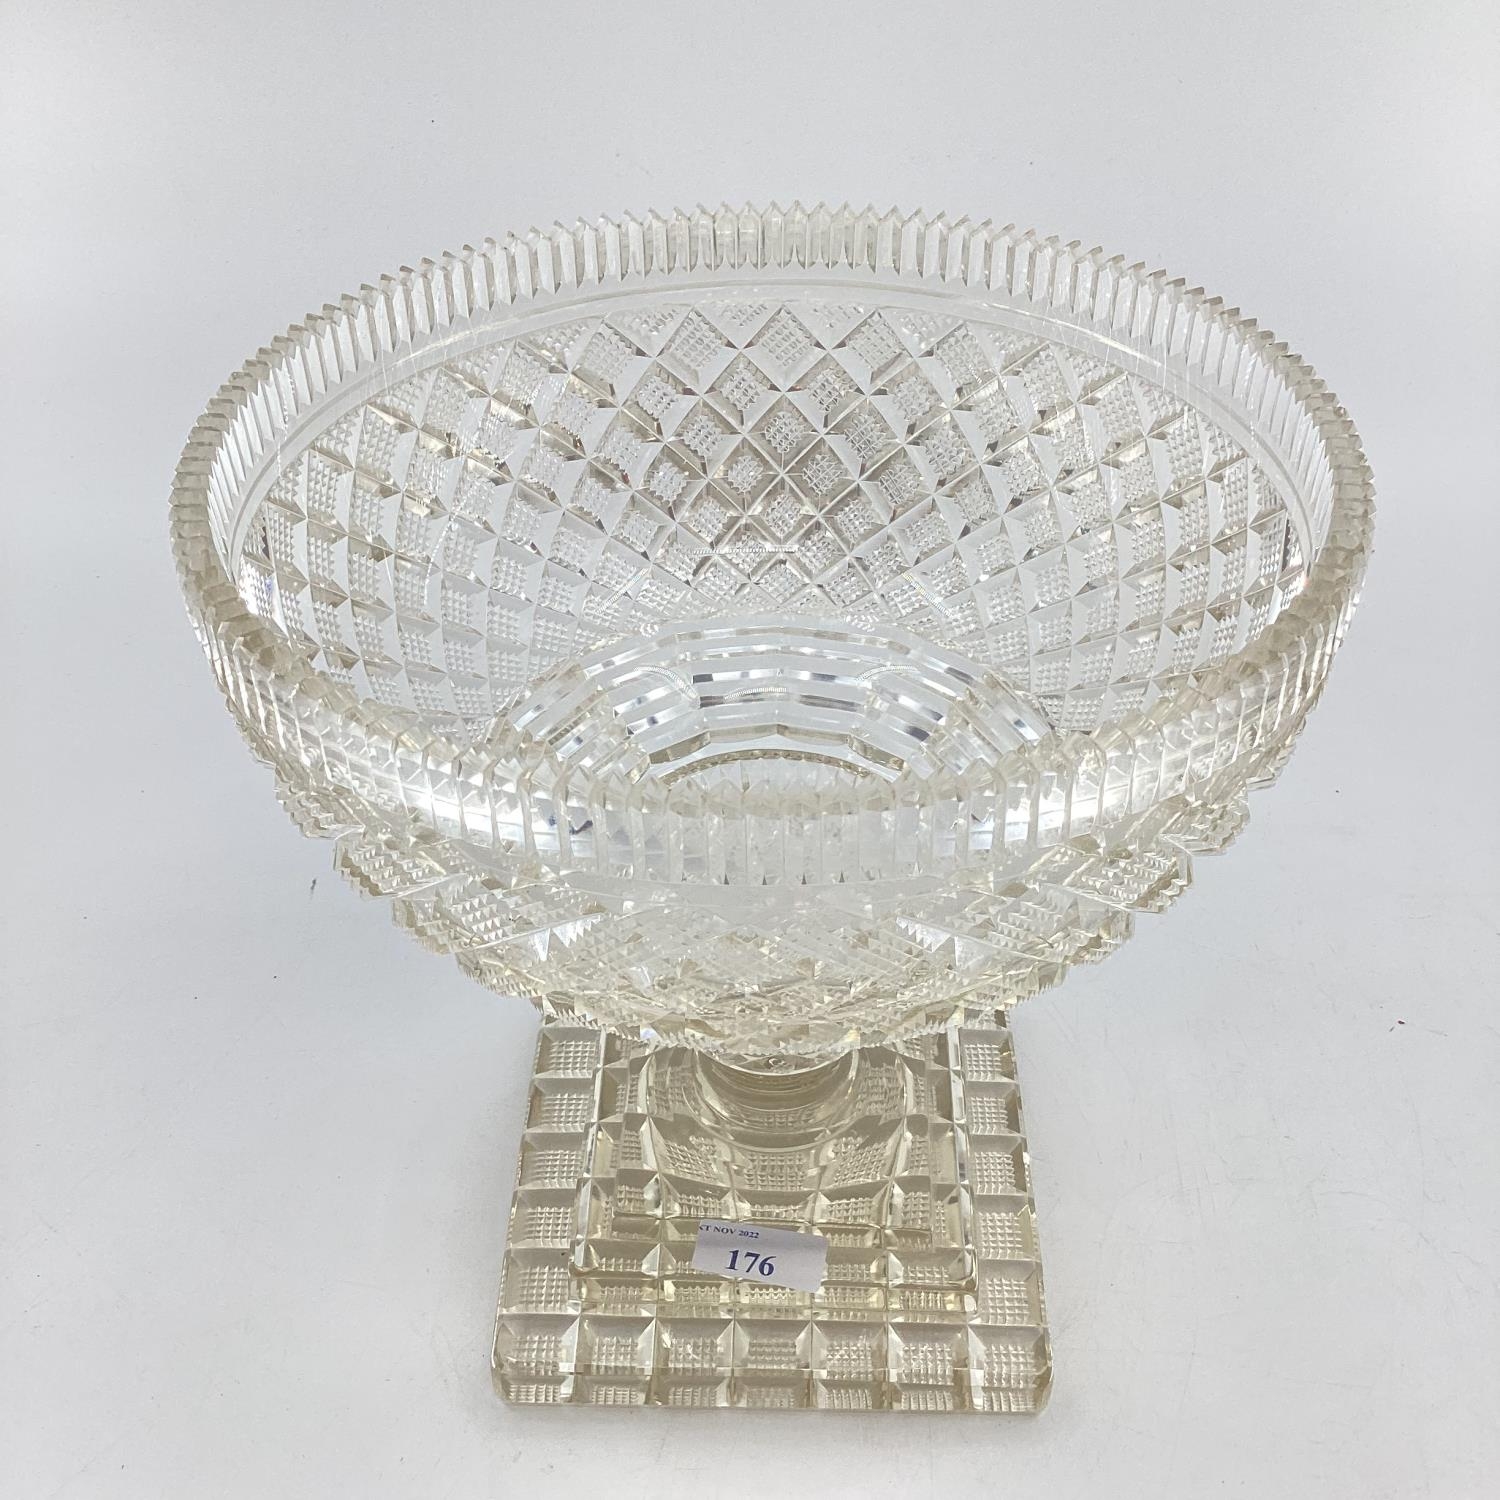 C20th heavy cut glass fruit bowl standing on stepped foot - Image 2 of 2